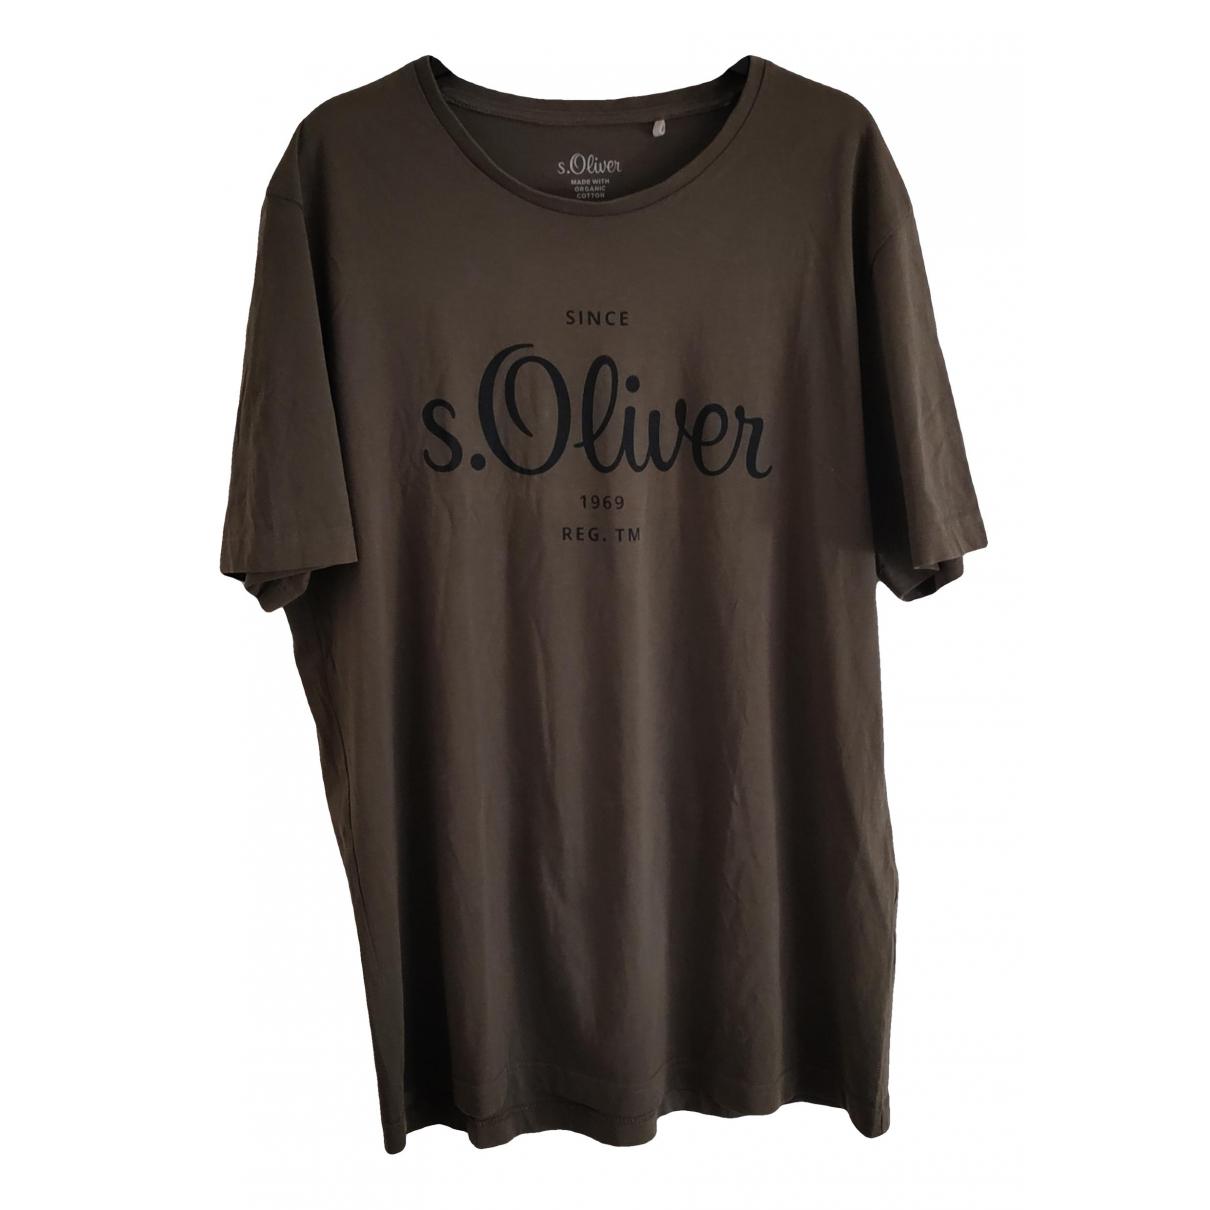 T-shirt S Oliver Green size XL International in Cotton - 36602811